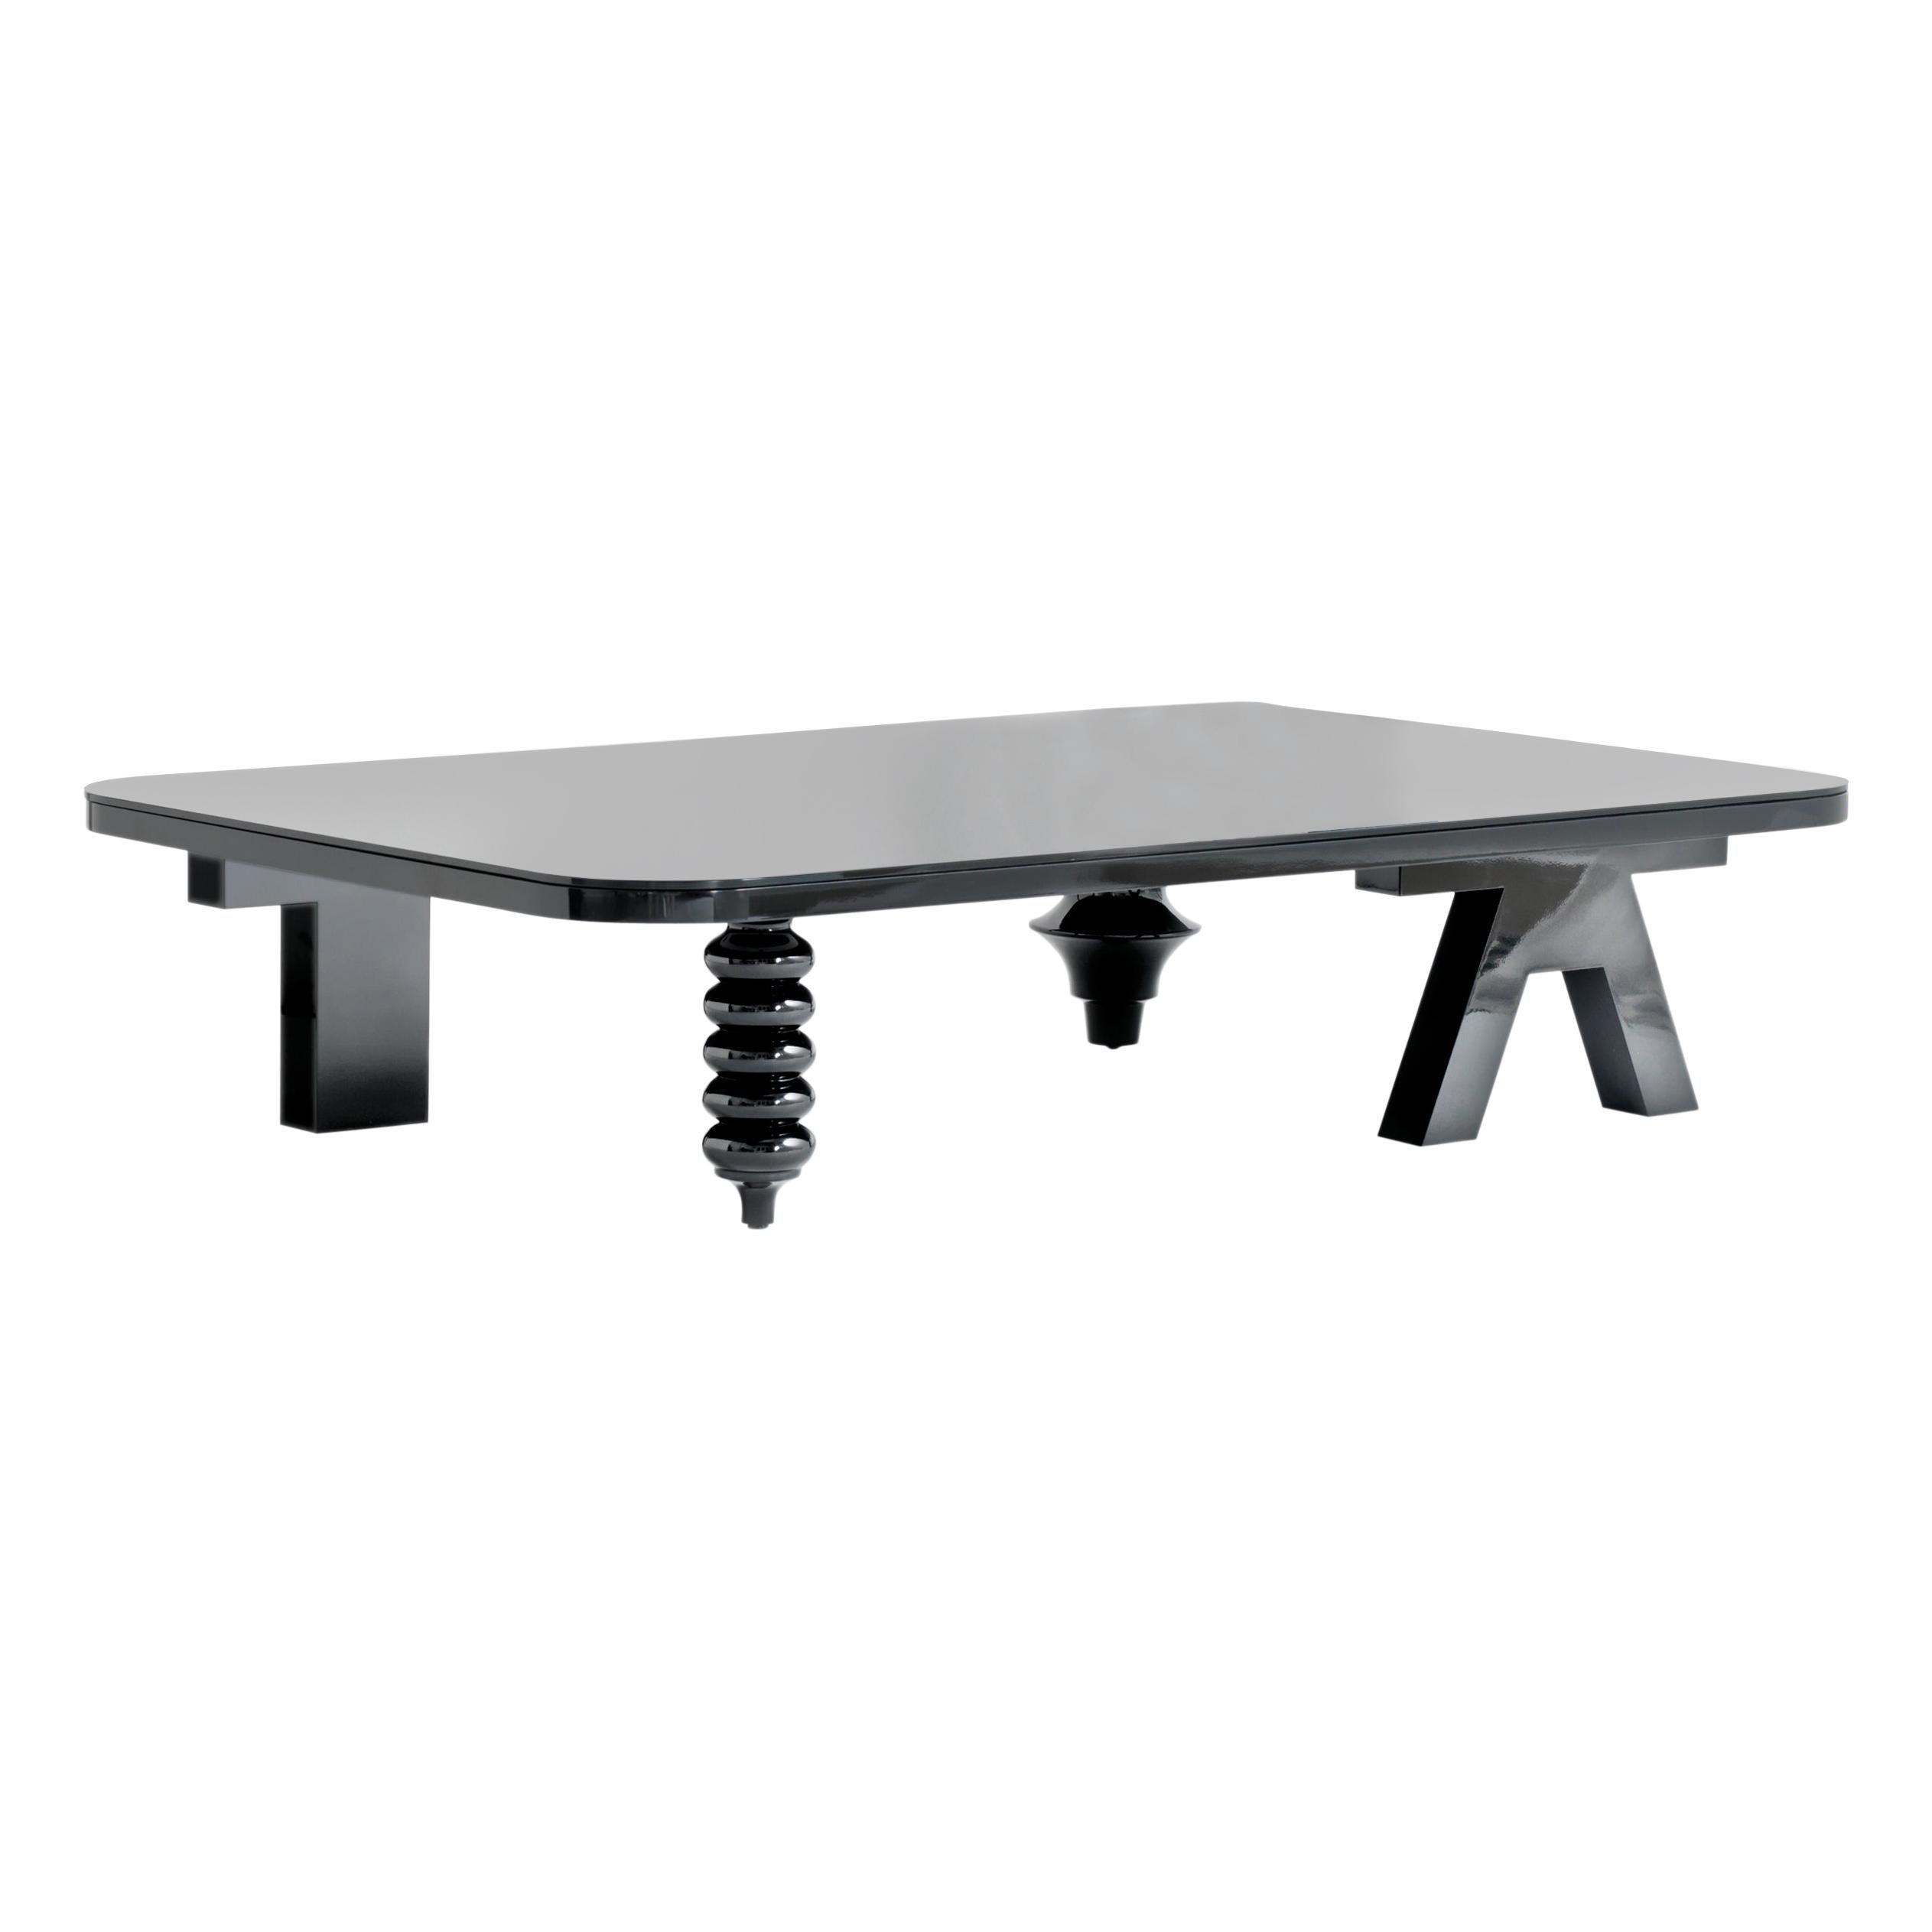 Rectangular low coffee table "Multileg" by Jaime Hayon high gloss black lacquer